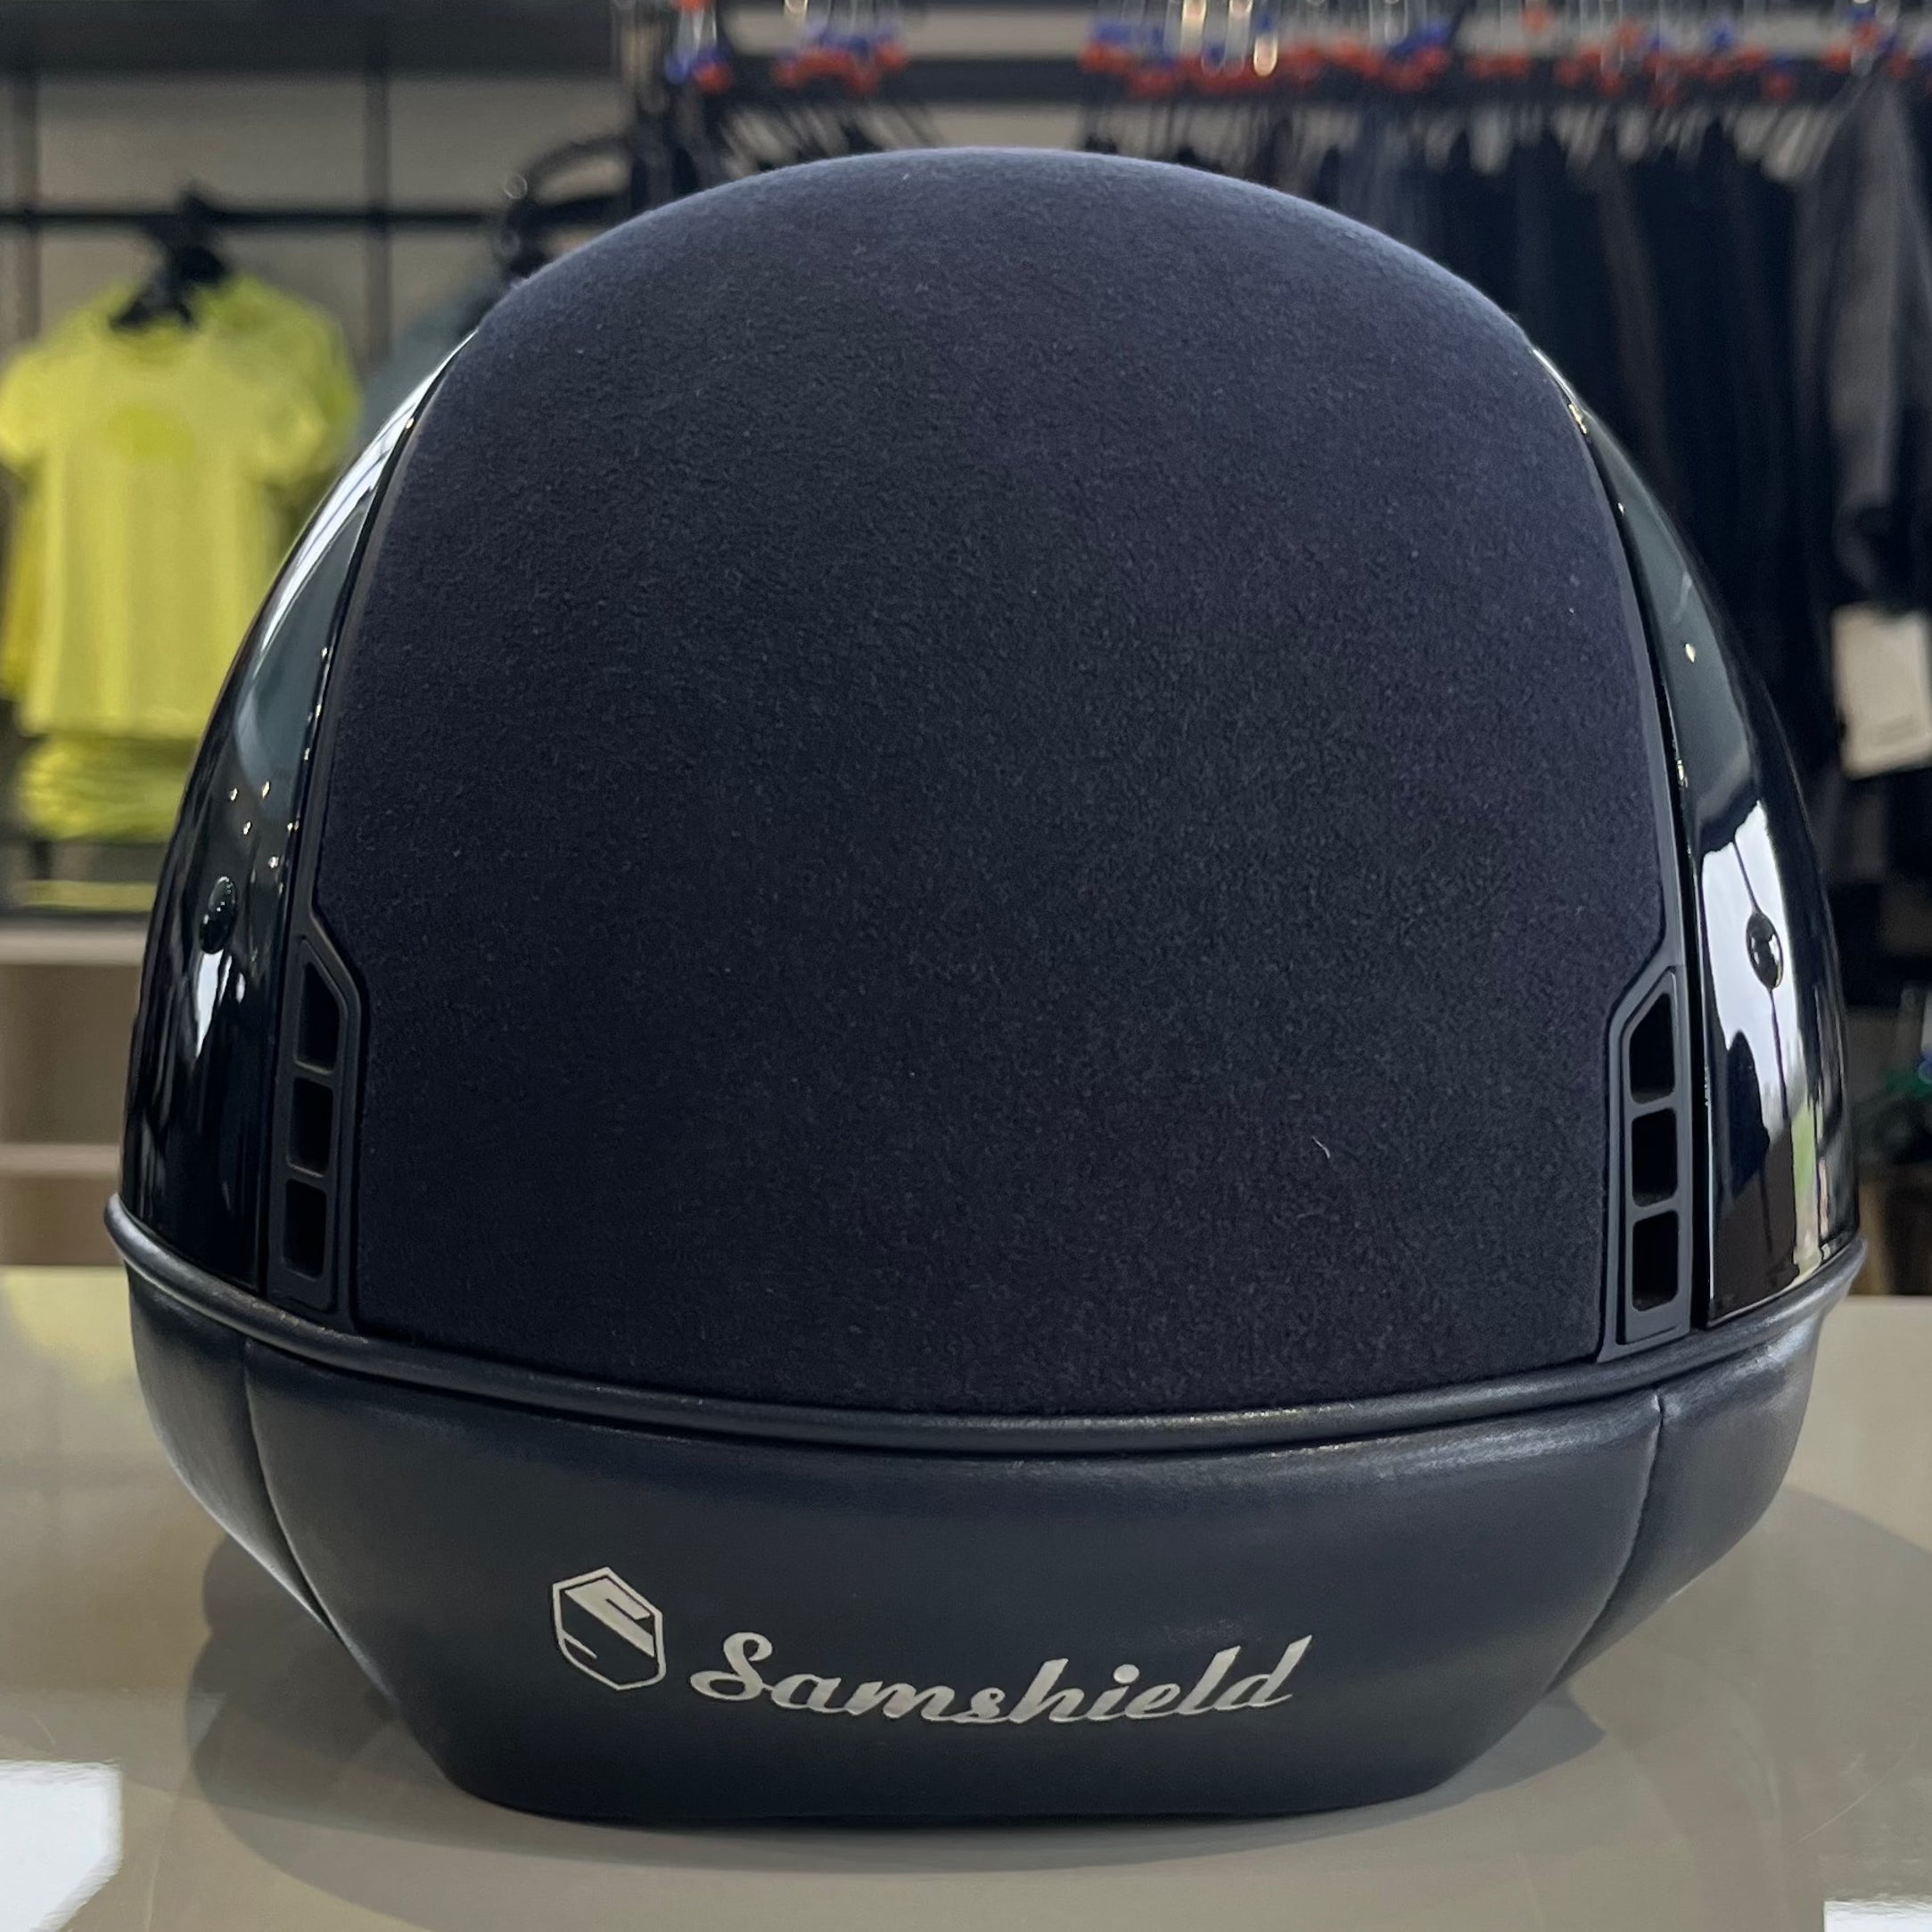 Samshield MissShield 1.0 Blue LIMITED EDITION S- in stock and ready to ship!